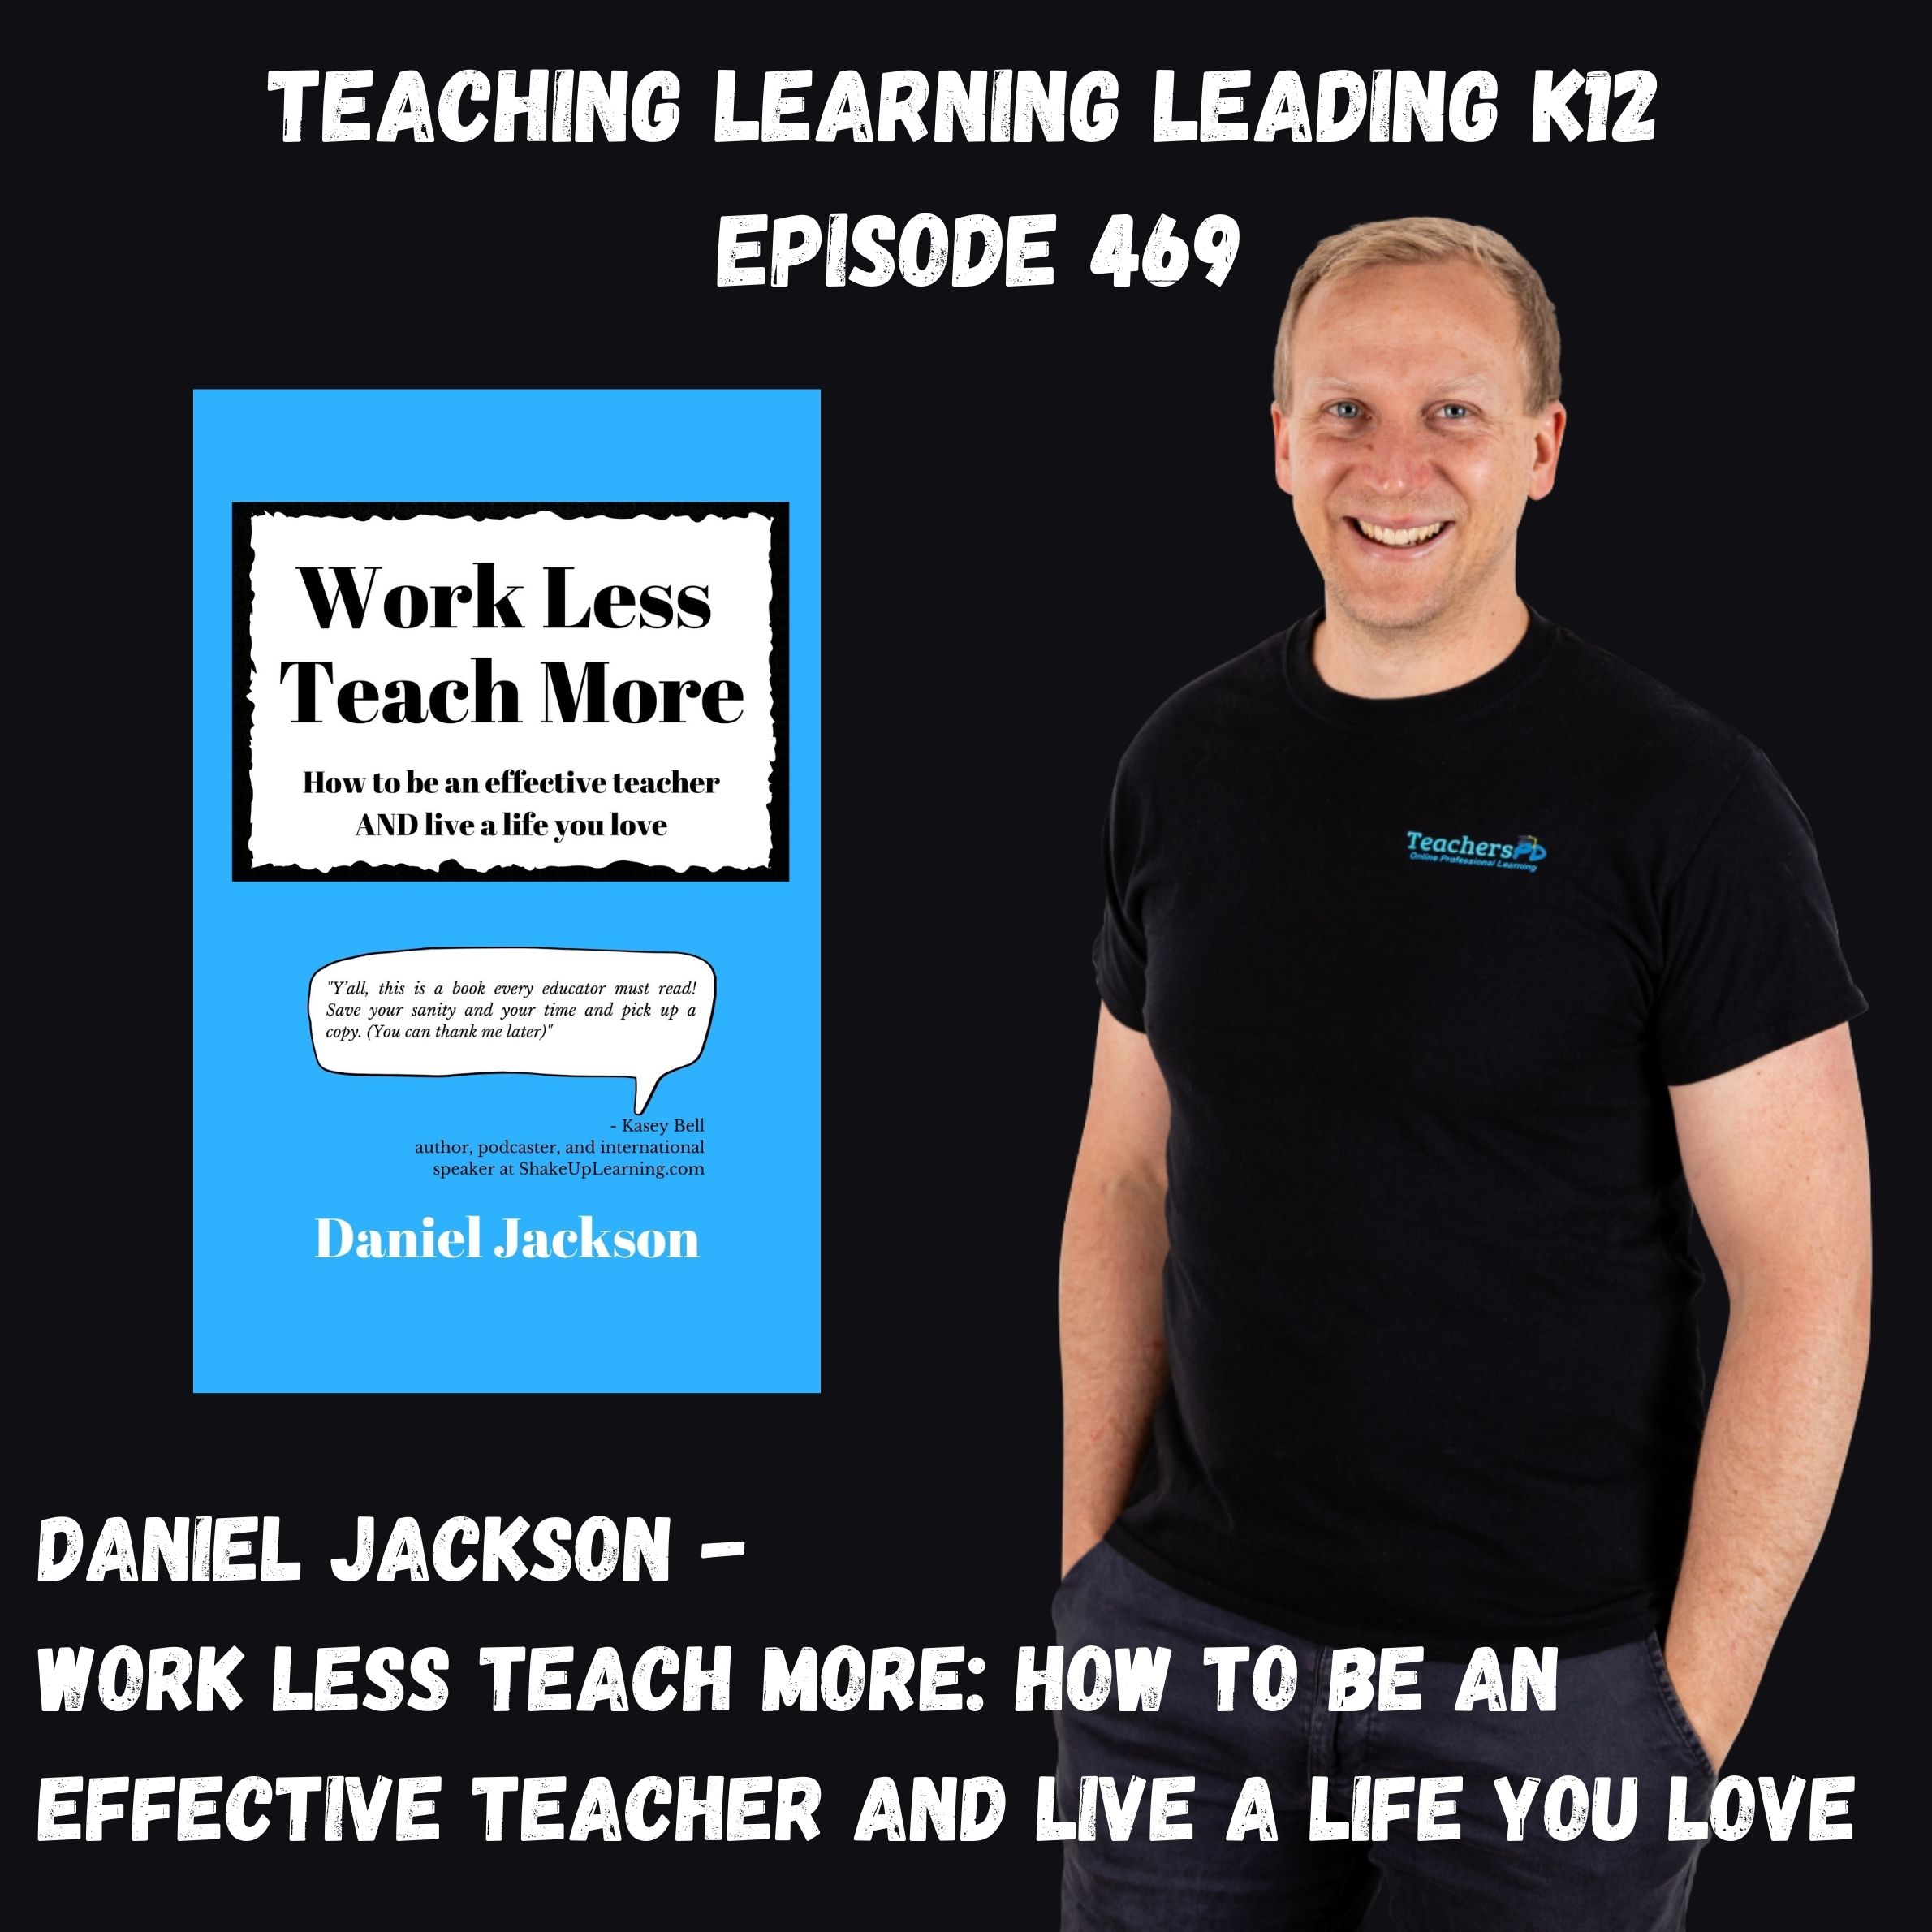 Daniel Jackson - Work Less Teach More: How to be an effective teacher and live a life you love - 469 Image